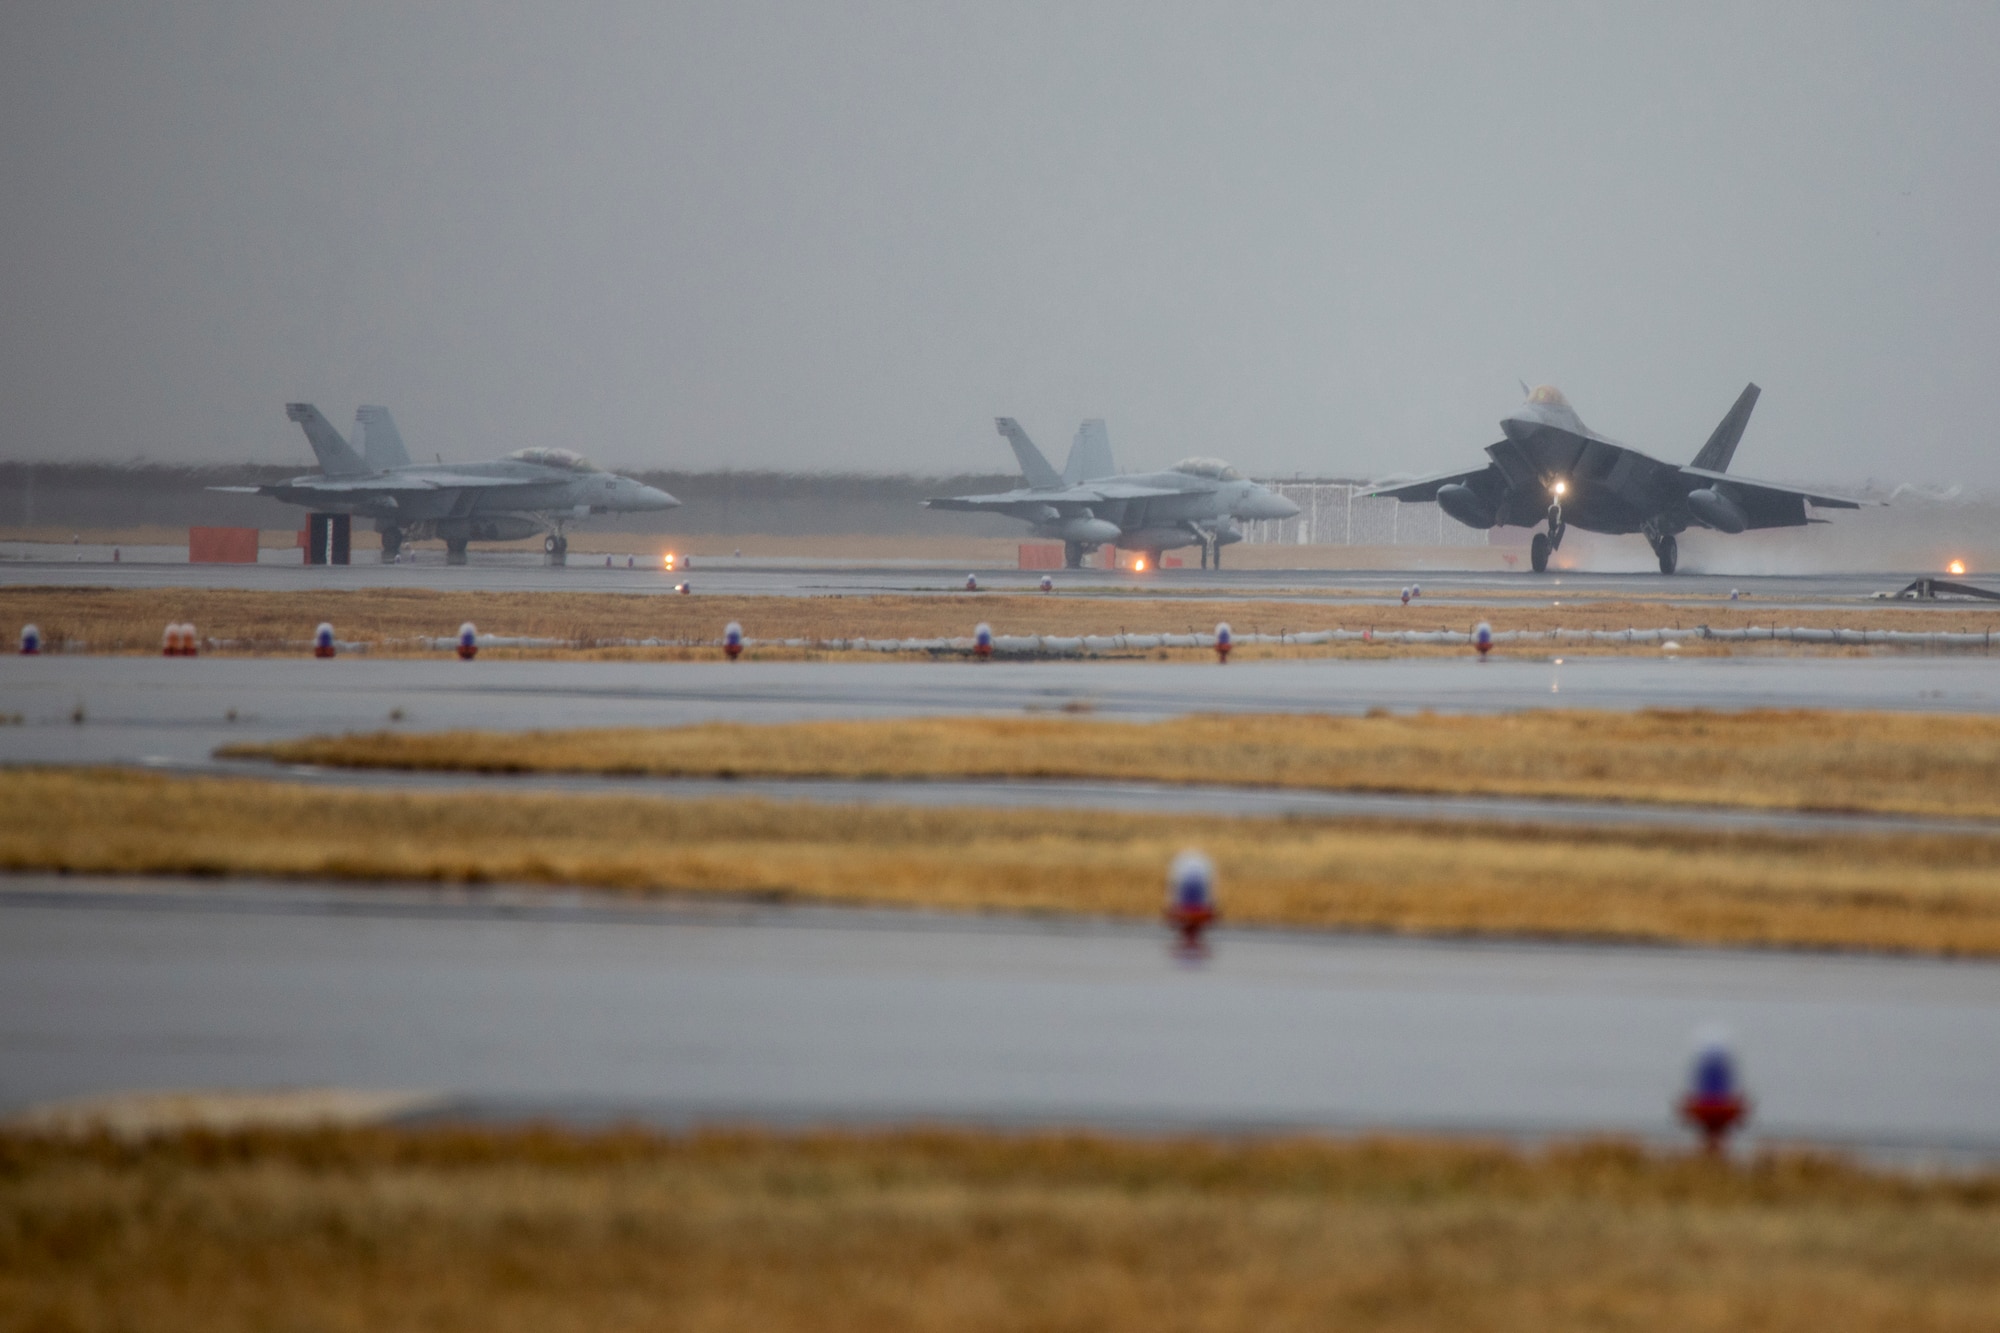 A U.S. Air Force F-22 Raptor with the 199th Fighter Squadron, lands at Marine Corps Air Station Iwakuni Japan, March 12, 2021. Airmen with the 199th Fighter Squadron and the 19th Fighter Squadron, based out of Joint Base Pearl Harbor-Hickam, Hawaii, deployed to MCAS Iwakuni to conduct local area training with U.S. Marine Corps units. This training event is designed to support a free and open Indo-Pacific by providing global reach and agility throughout the area. (U.S. Marine Corps photo by Lance Cpl. Tyler Harmon)